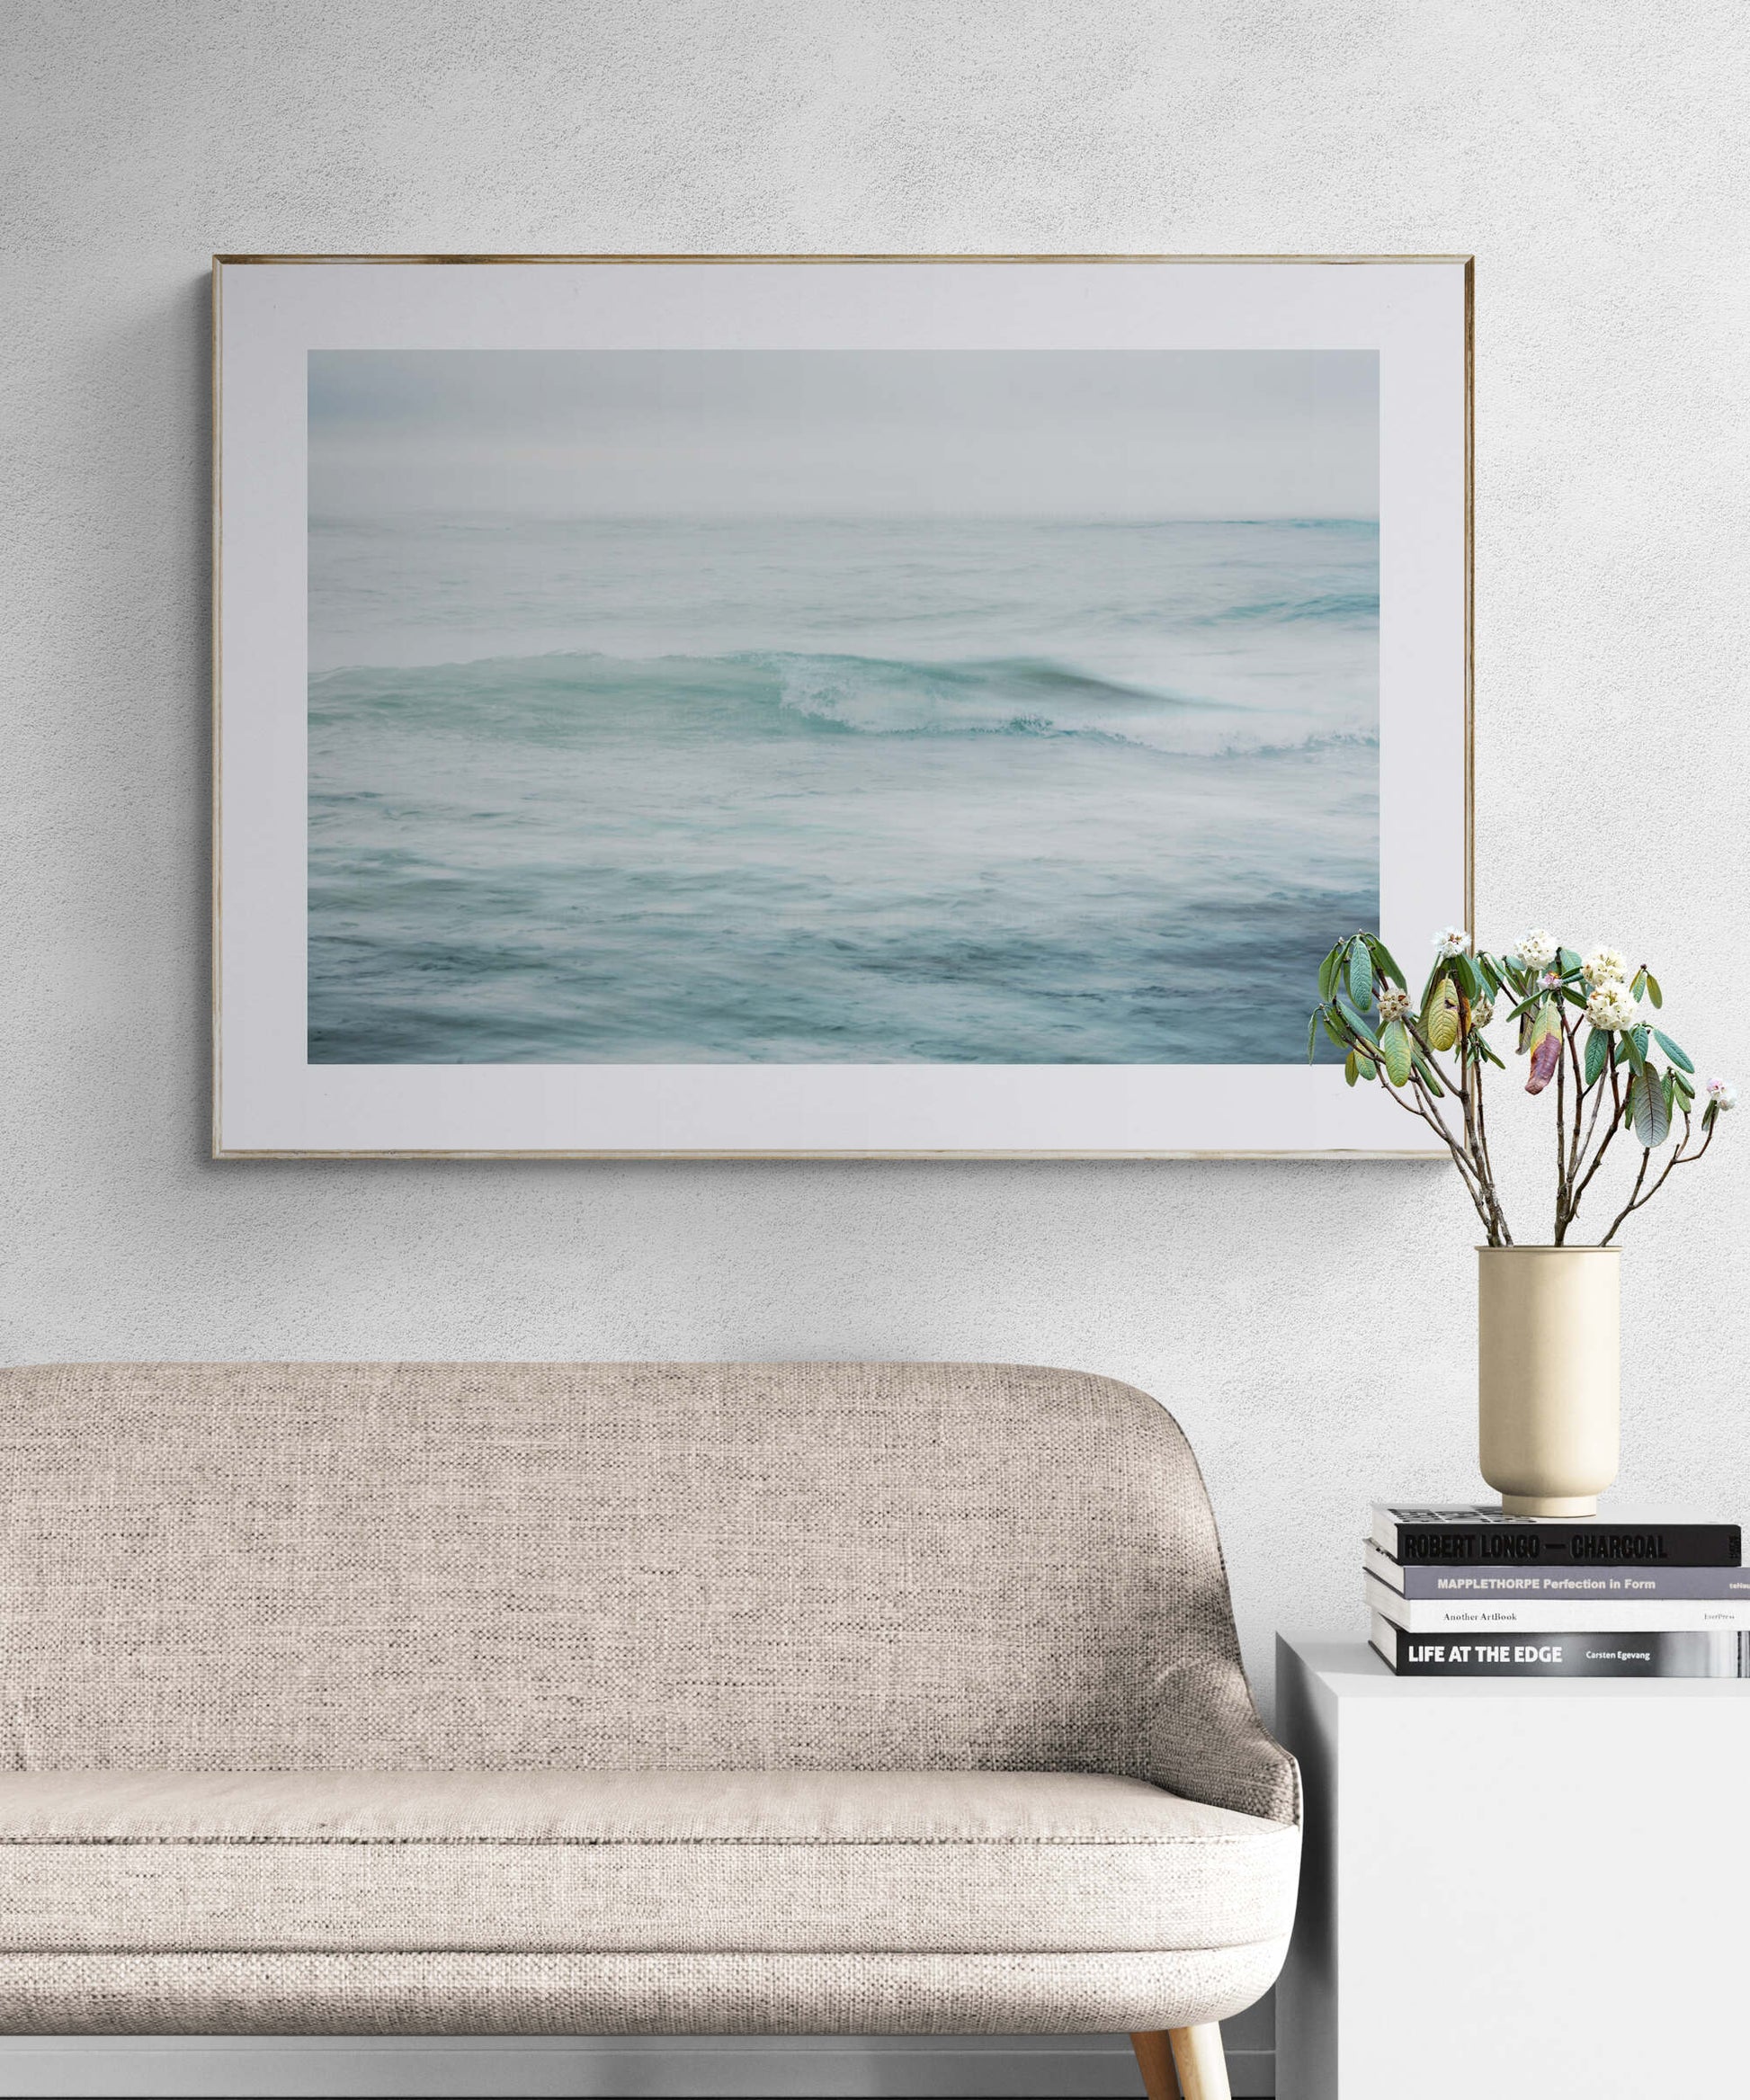 Photograph of Ocean Wave as Wall Art in a Living Room